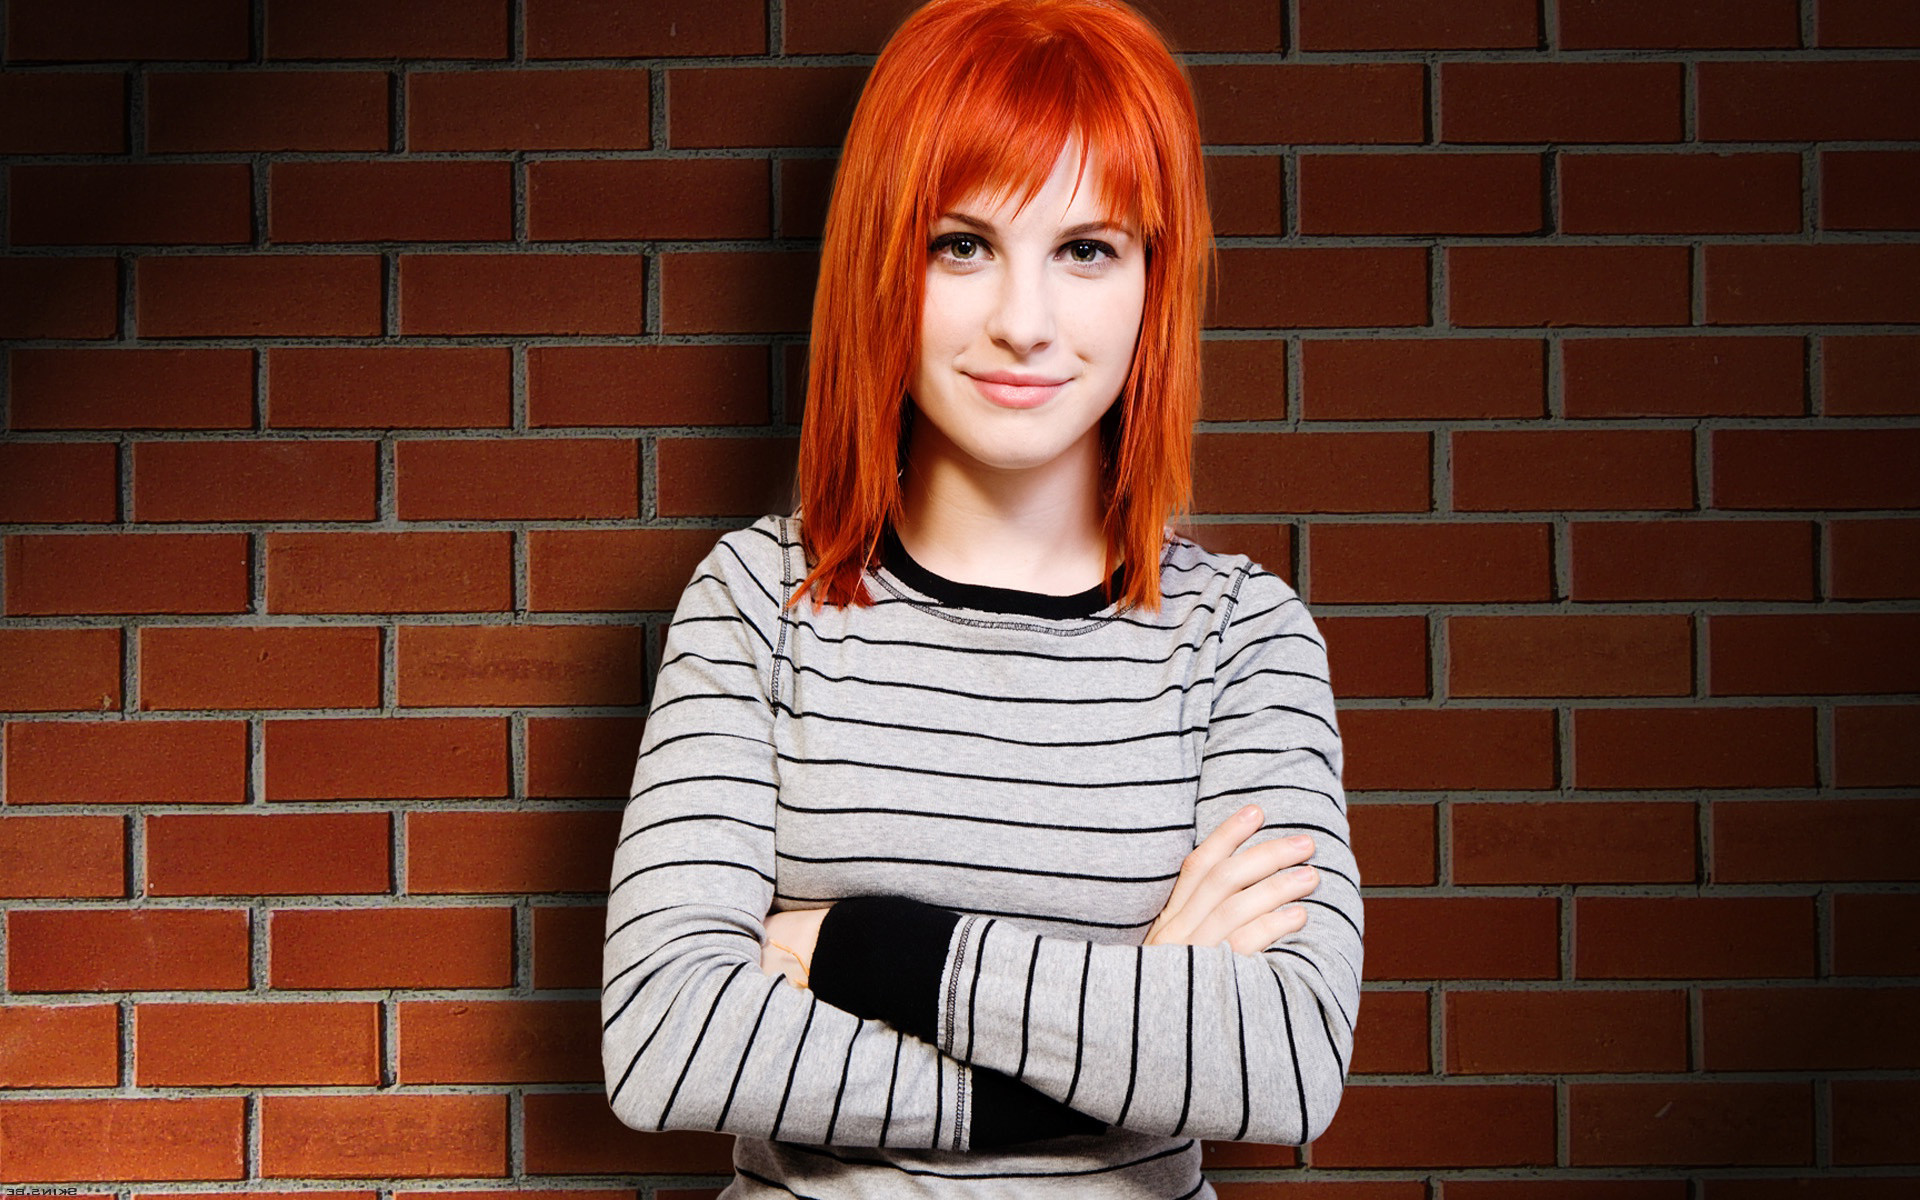 1920x1200 364 Hayley Williams HD Wallpapers | Backgrounds - Wallpaper Abyss Hayley  Williams Wallpapers 2015 - Wallpaper Cave ...